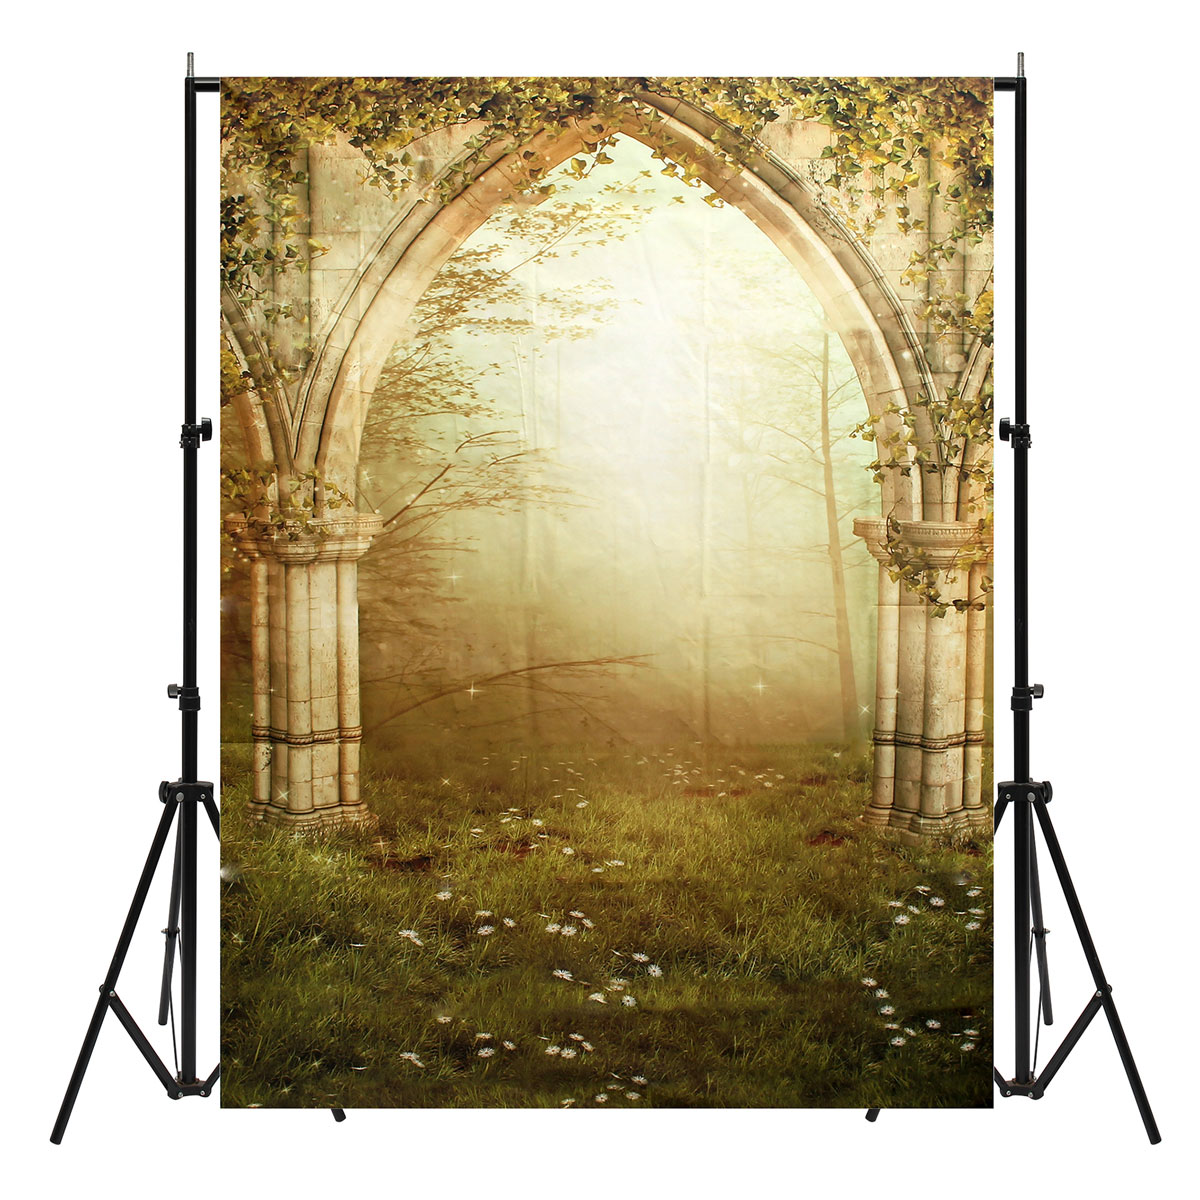 

Vinyl Forest Realistic Effect Scenic Photography Backdrop Studio Prop Photo Background